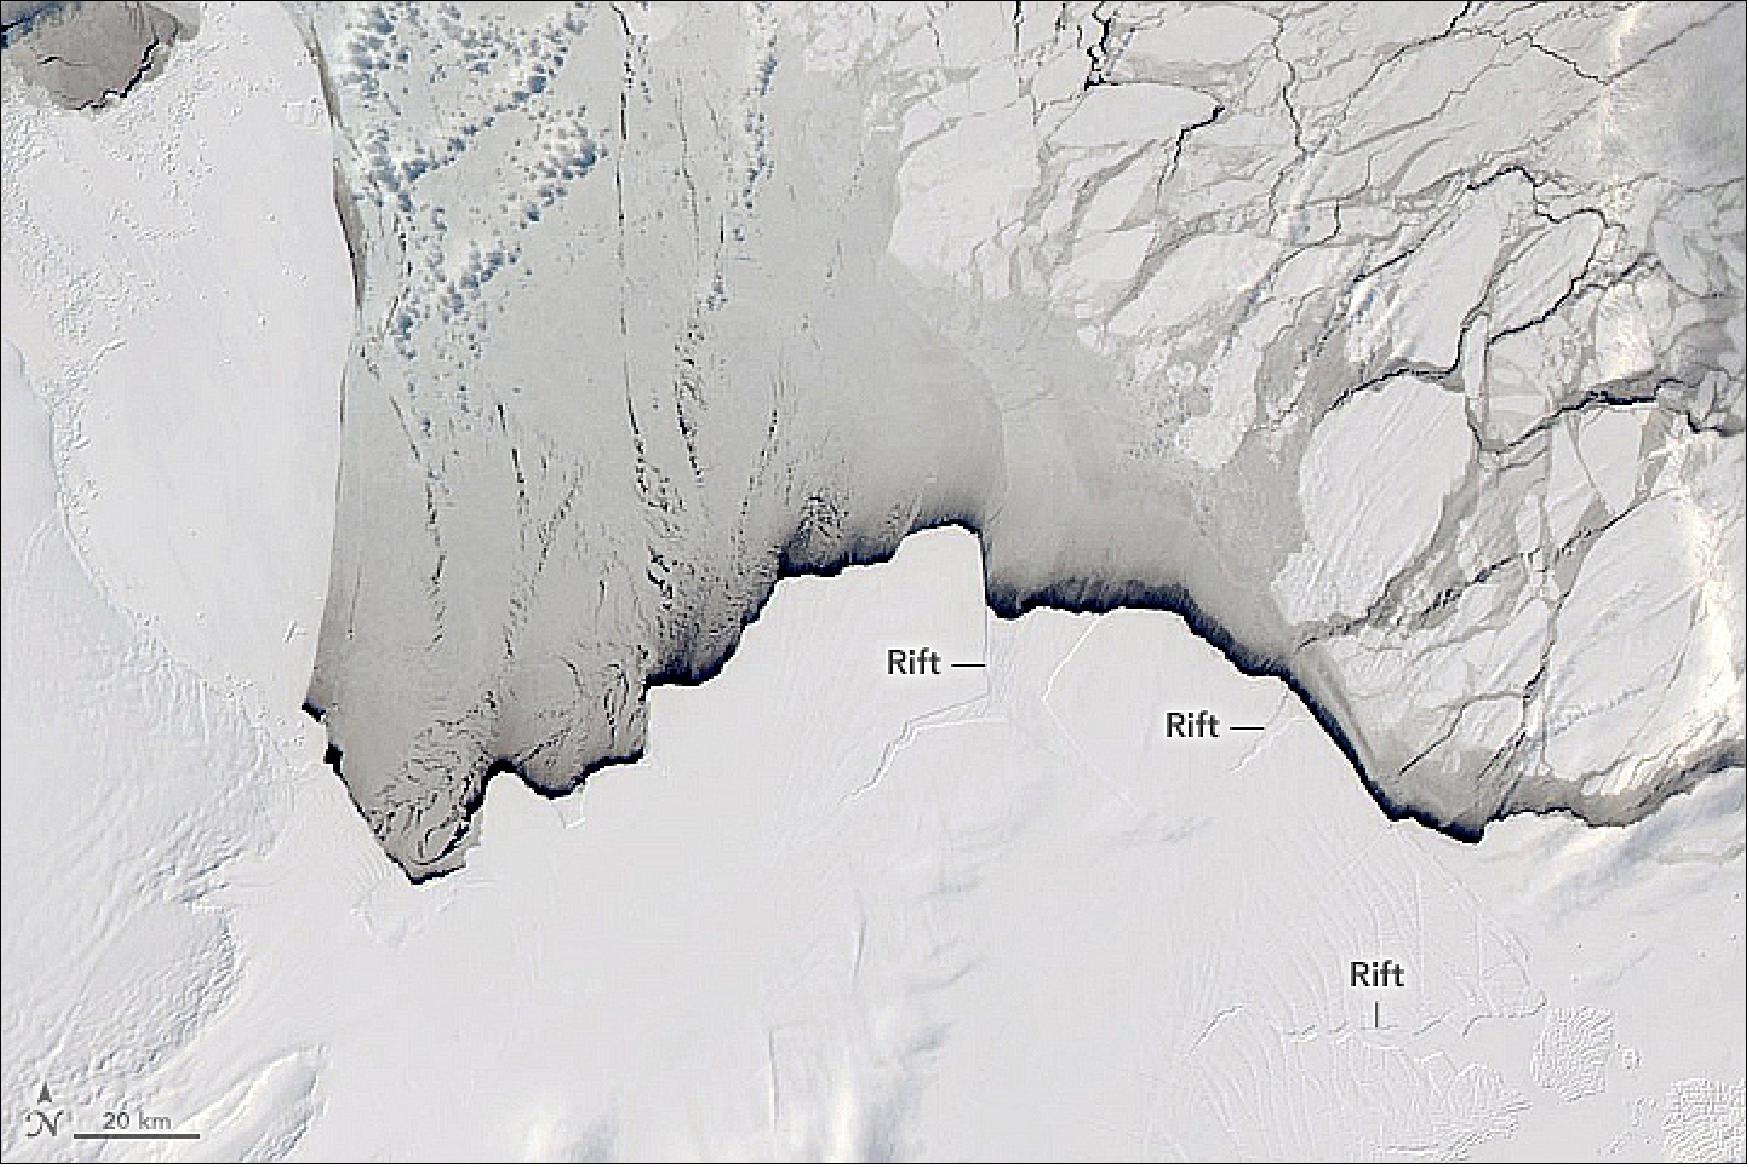 Figure 12: NASA snow and ice scientist Catherine Walker, and colleagues Helen Fricker (Scripps/UCSD) and Jeremy Bassis (University of Michigan), have taken another approach. They use satellite data to study the large systems of rifts that propagate across ice shelves as a precursor to calving. Over the past 20 years, rifts at Amery have been the most active—growing faster and more continuously than any other ice shelf around Antarctica. MODIS image as of 13 September 2019 (image credit: NASA Earth Observatory image by Lauren Dauphin, using MODIS data from NASA EOSDIS/LANCE and GIBS/Worldview. Story by Kathryn Hansen)